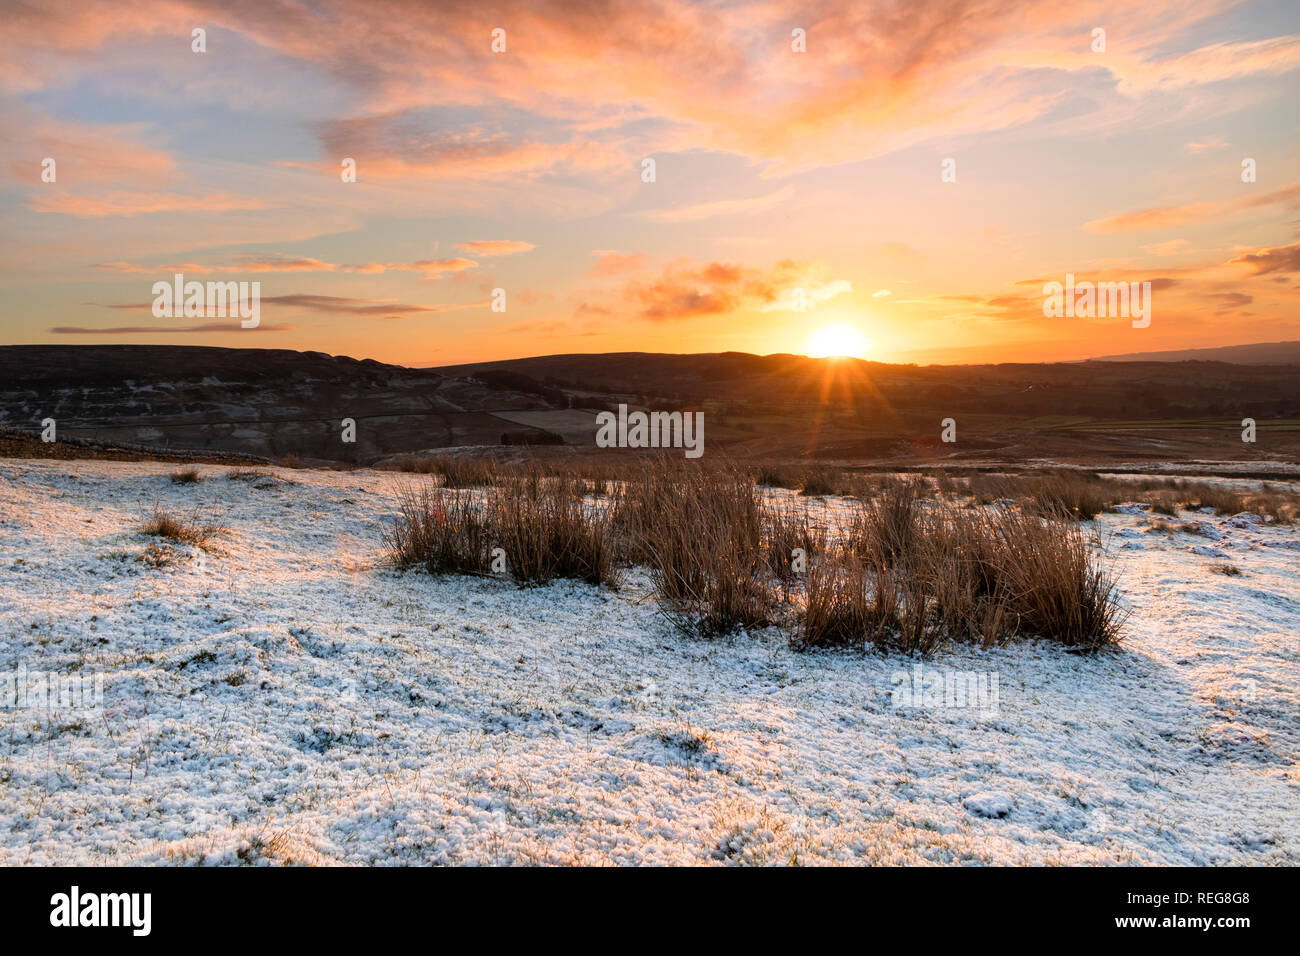 Teesdale, County Durham, UK.  Tuesday 22nd January 2019. UK Weather.  It was a cold, snowy but colourful start to the day as the sun rose over the North Pennines in County Durham. The forecast is for sunny spells and further snow showers, some of which could be heavy. Credit: David Forster/Alamy Live News Stock Photo